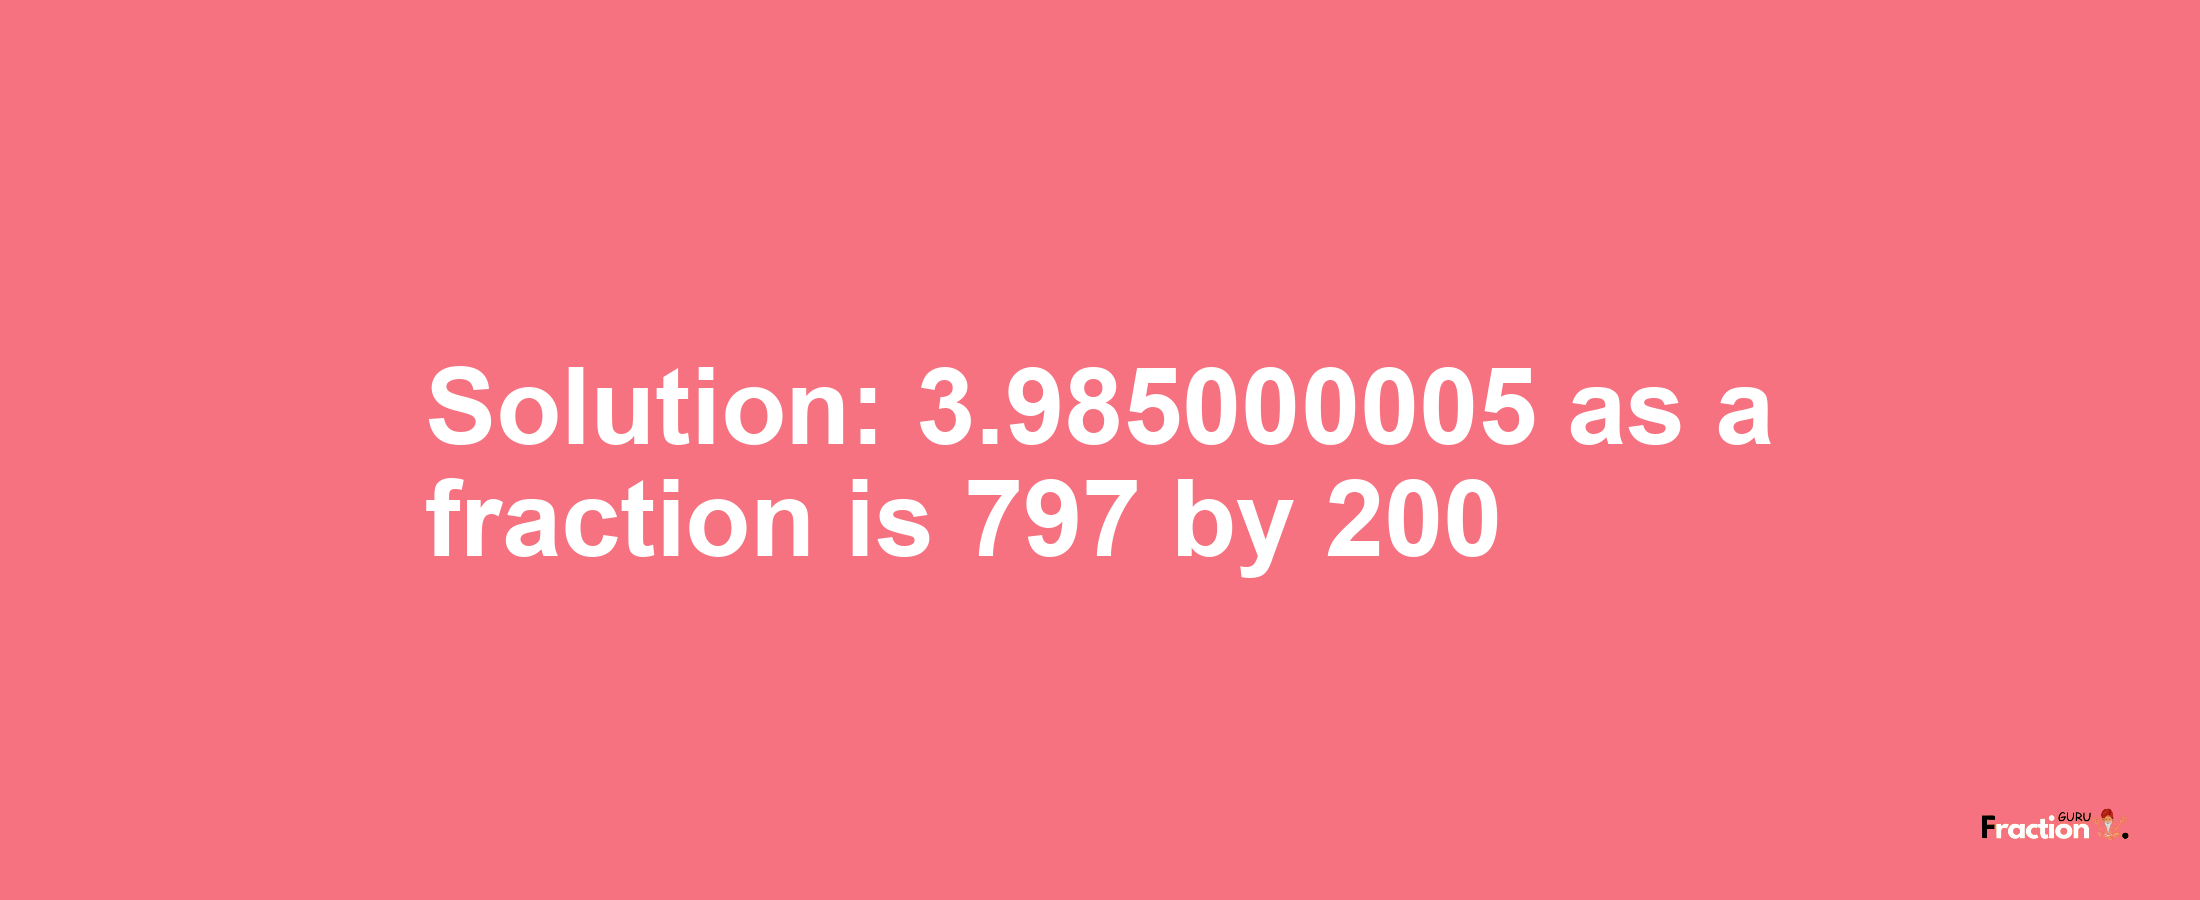 Solution:3.985000005 as a fraction is 797/200